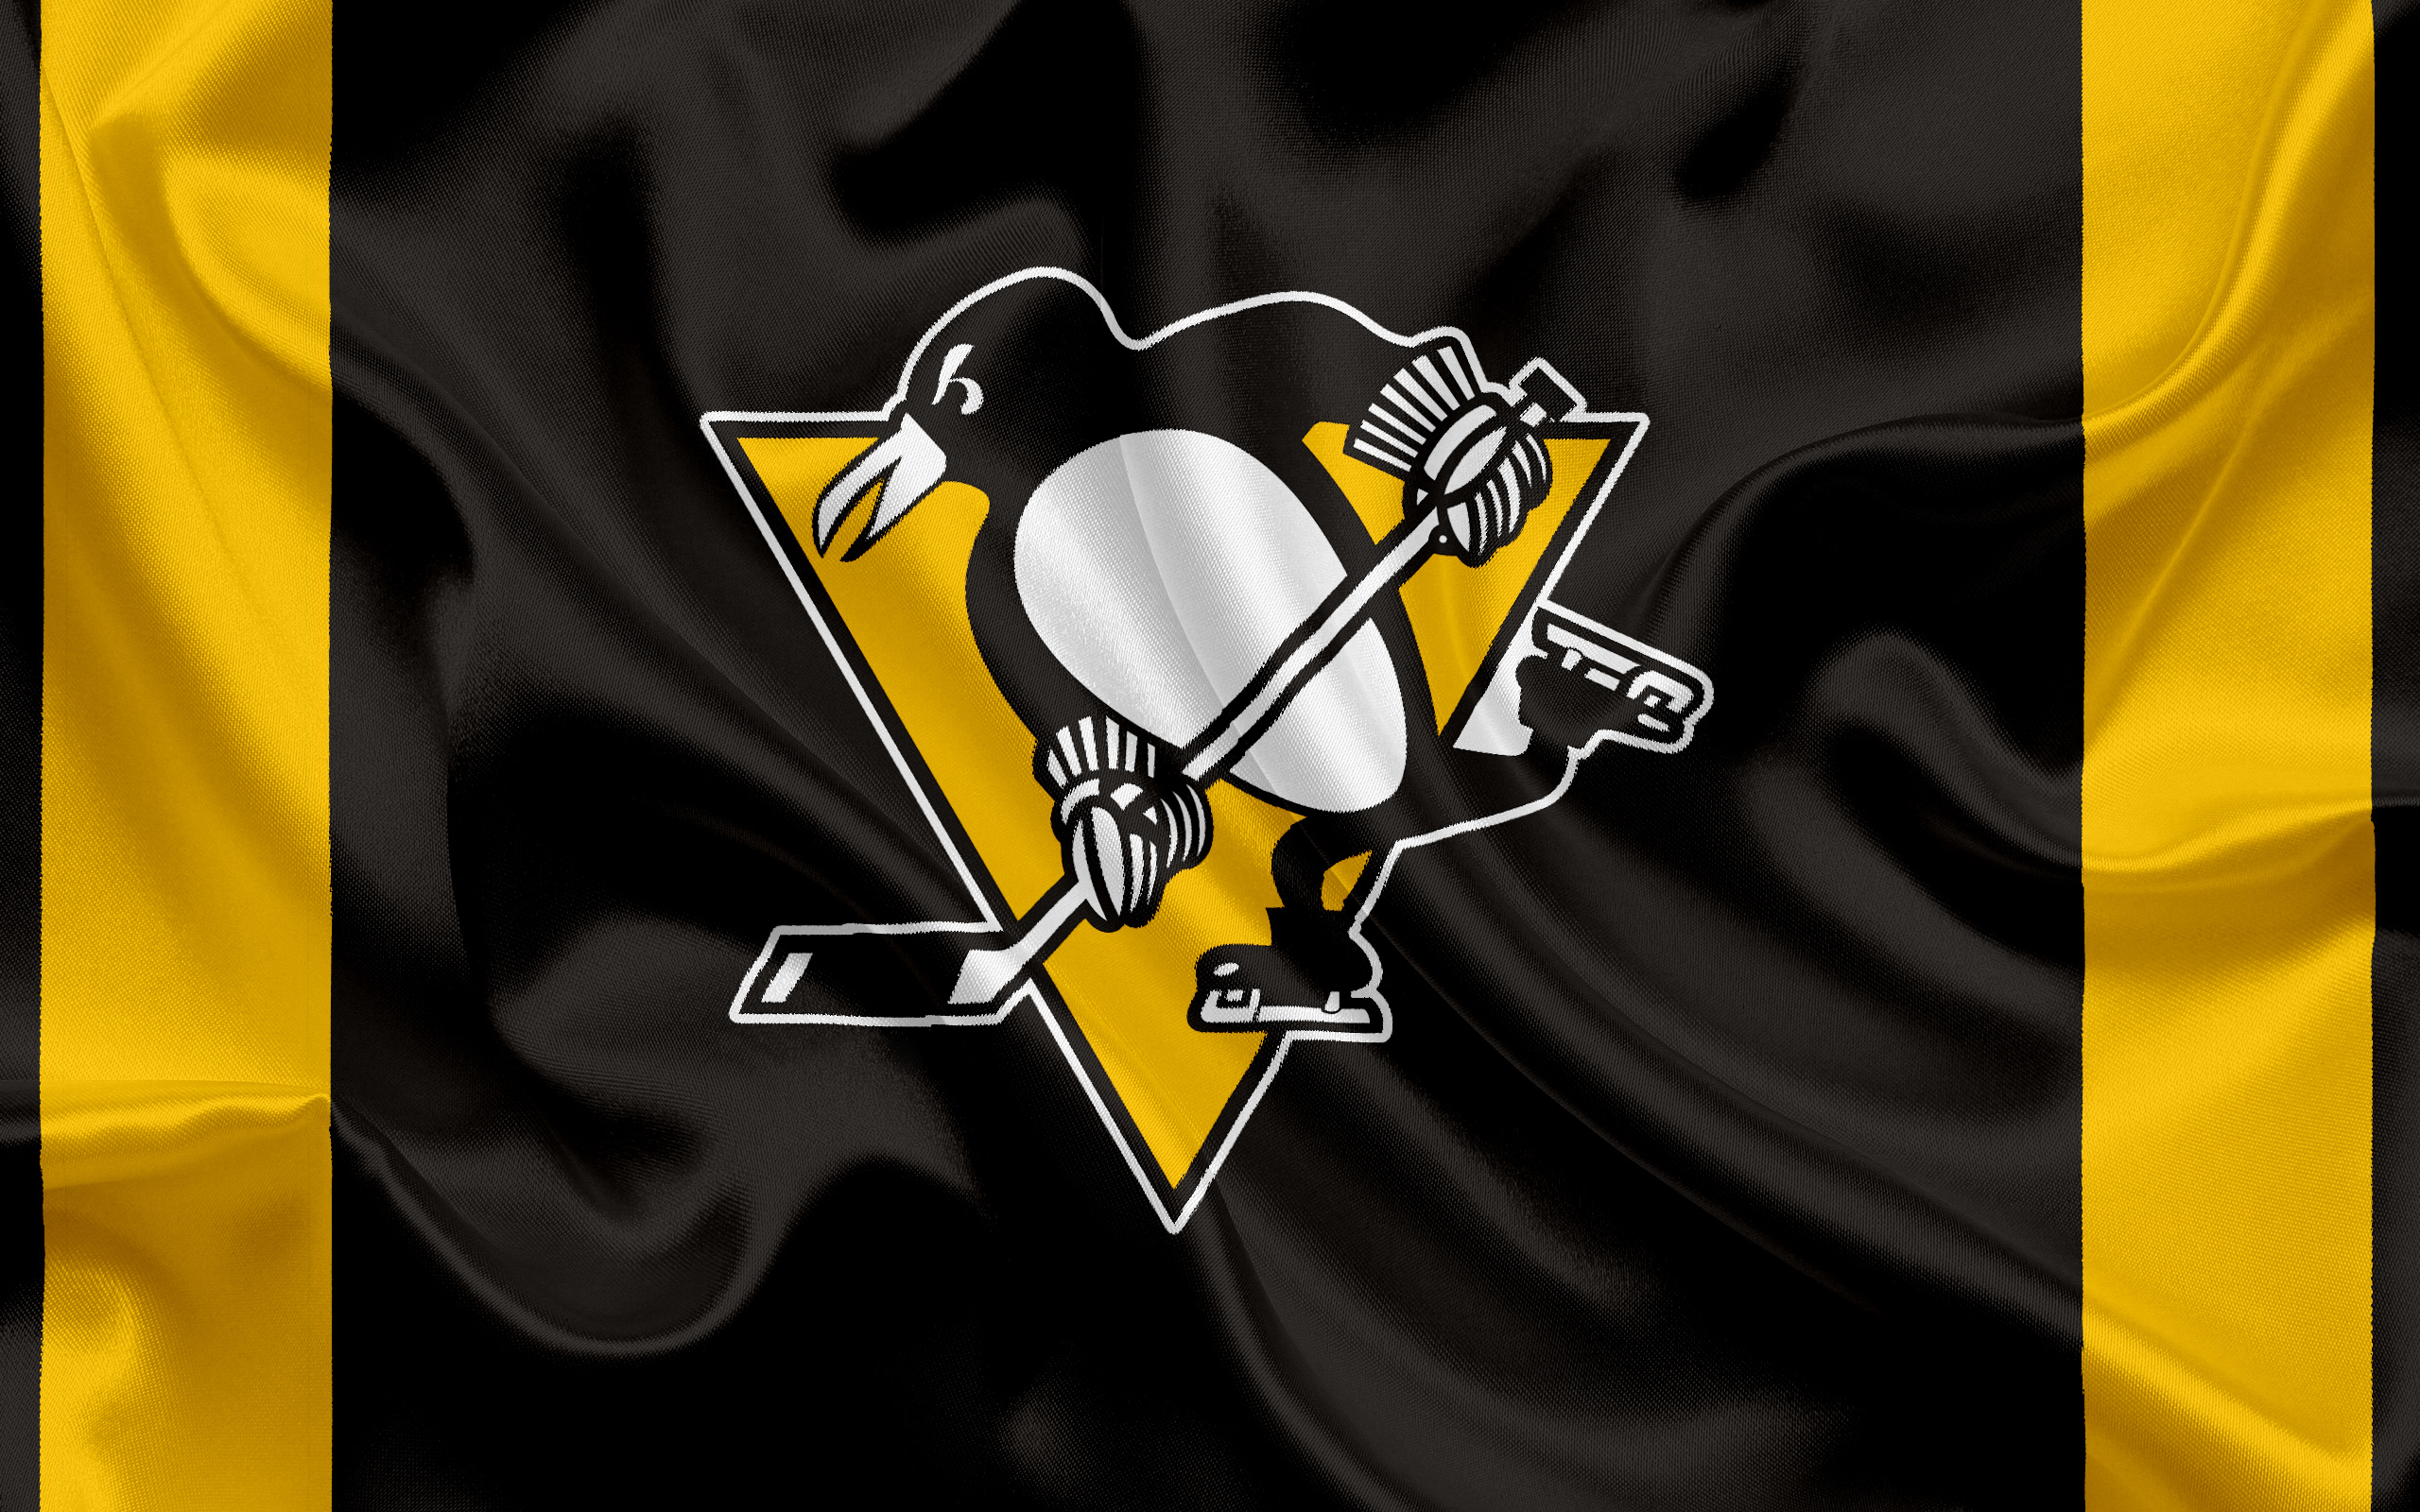 Pittsburgh Penguins: The team have played their home games at PPG Paints Arena since 2010. 2560x1600 HD Wallpaper.